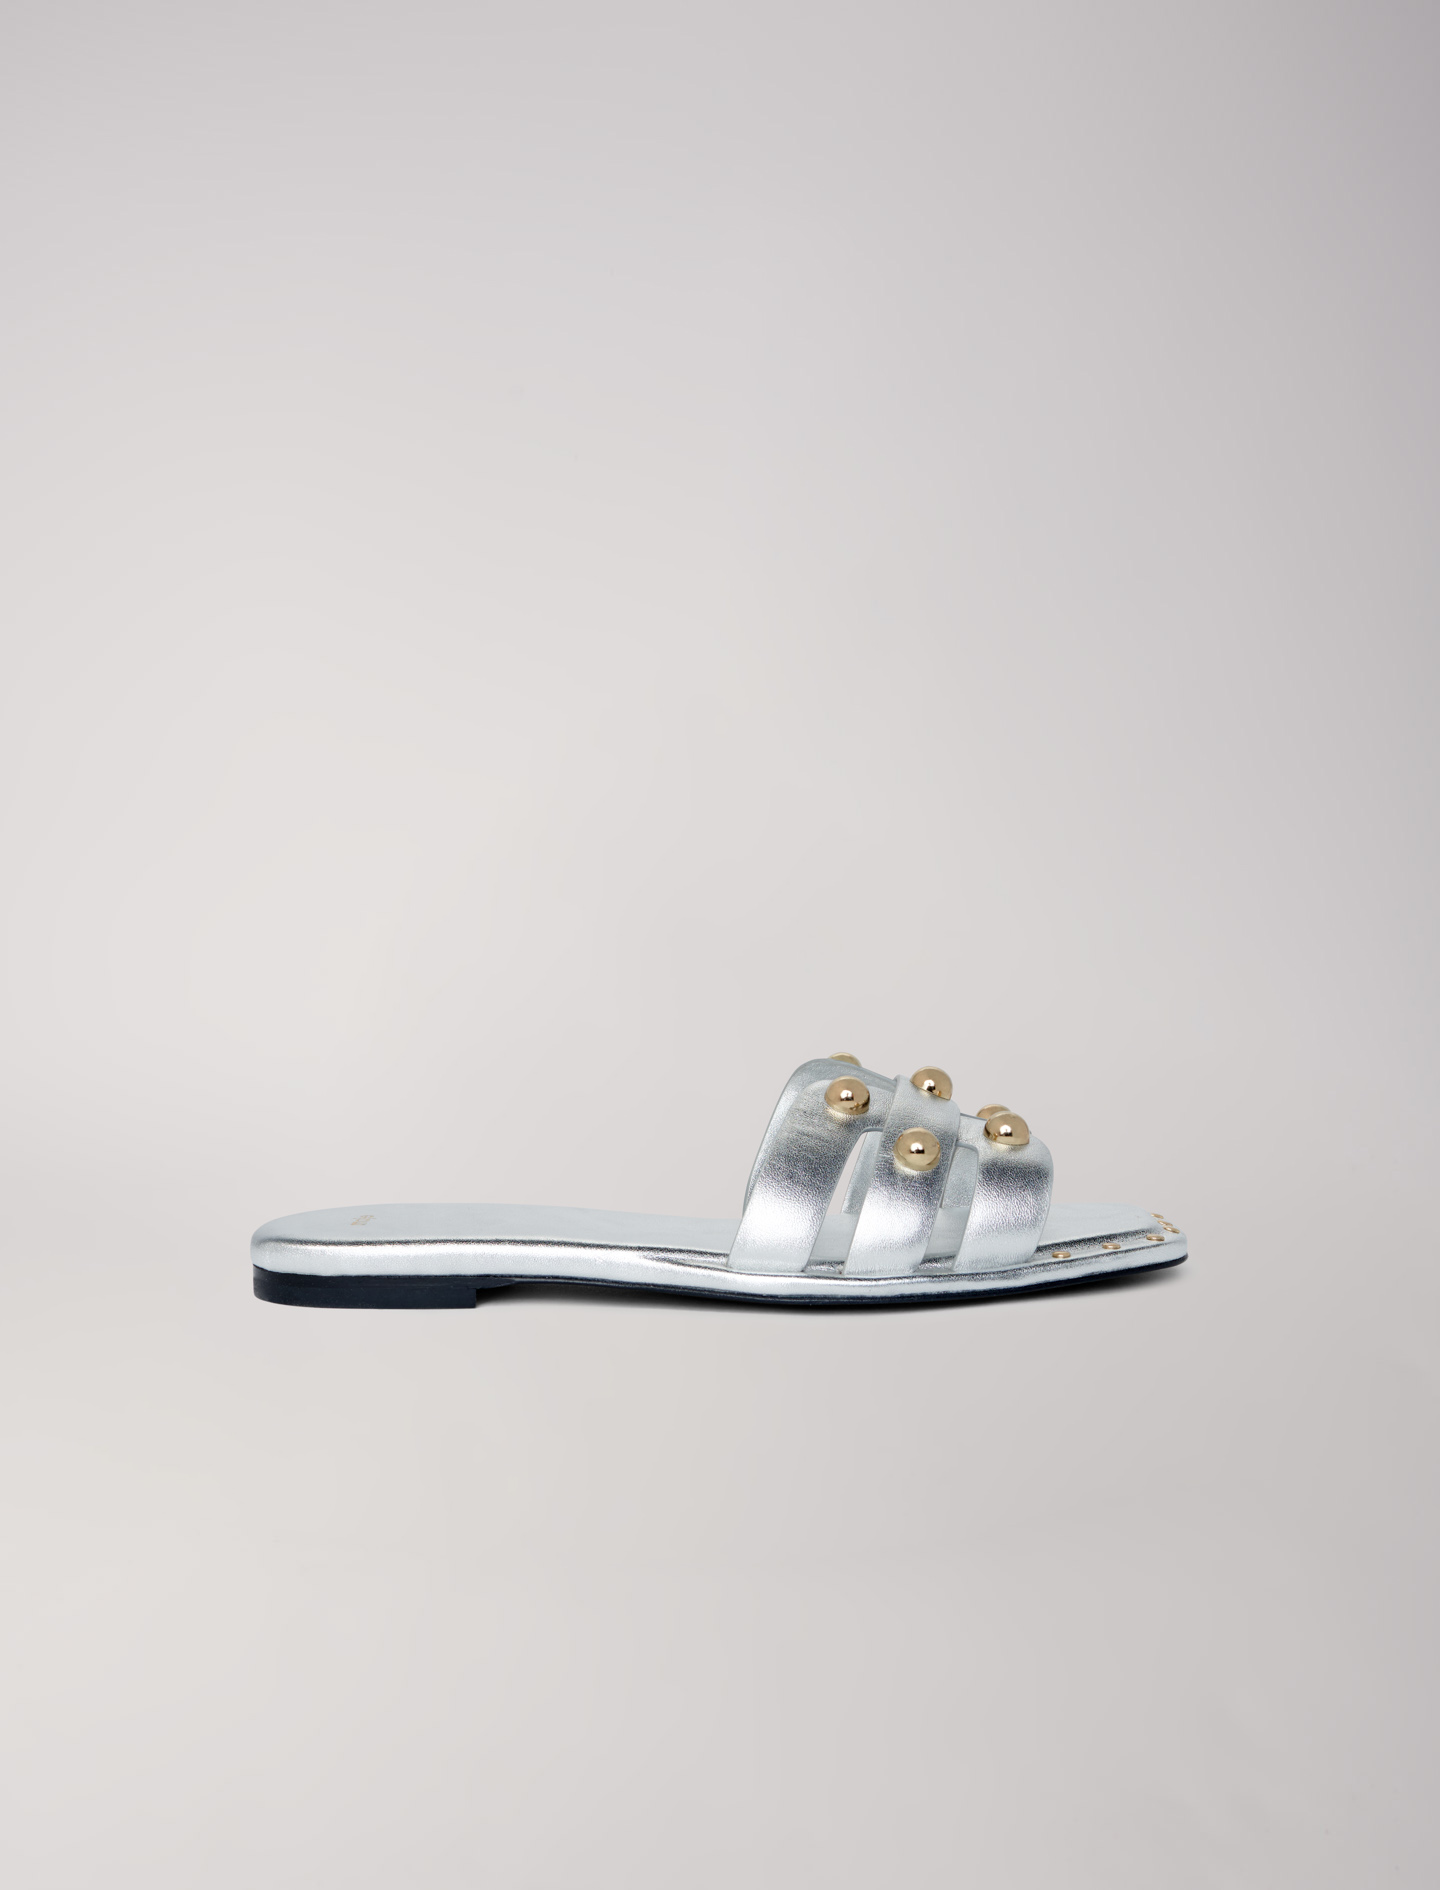 Maje Woman's copper Jewellery: Studded leather mules for Spring/Summer, in color Silver / Grey